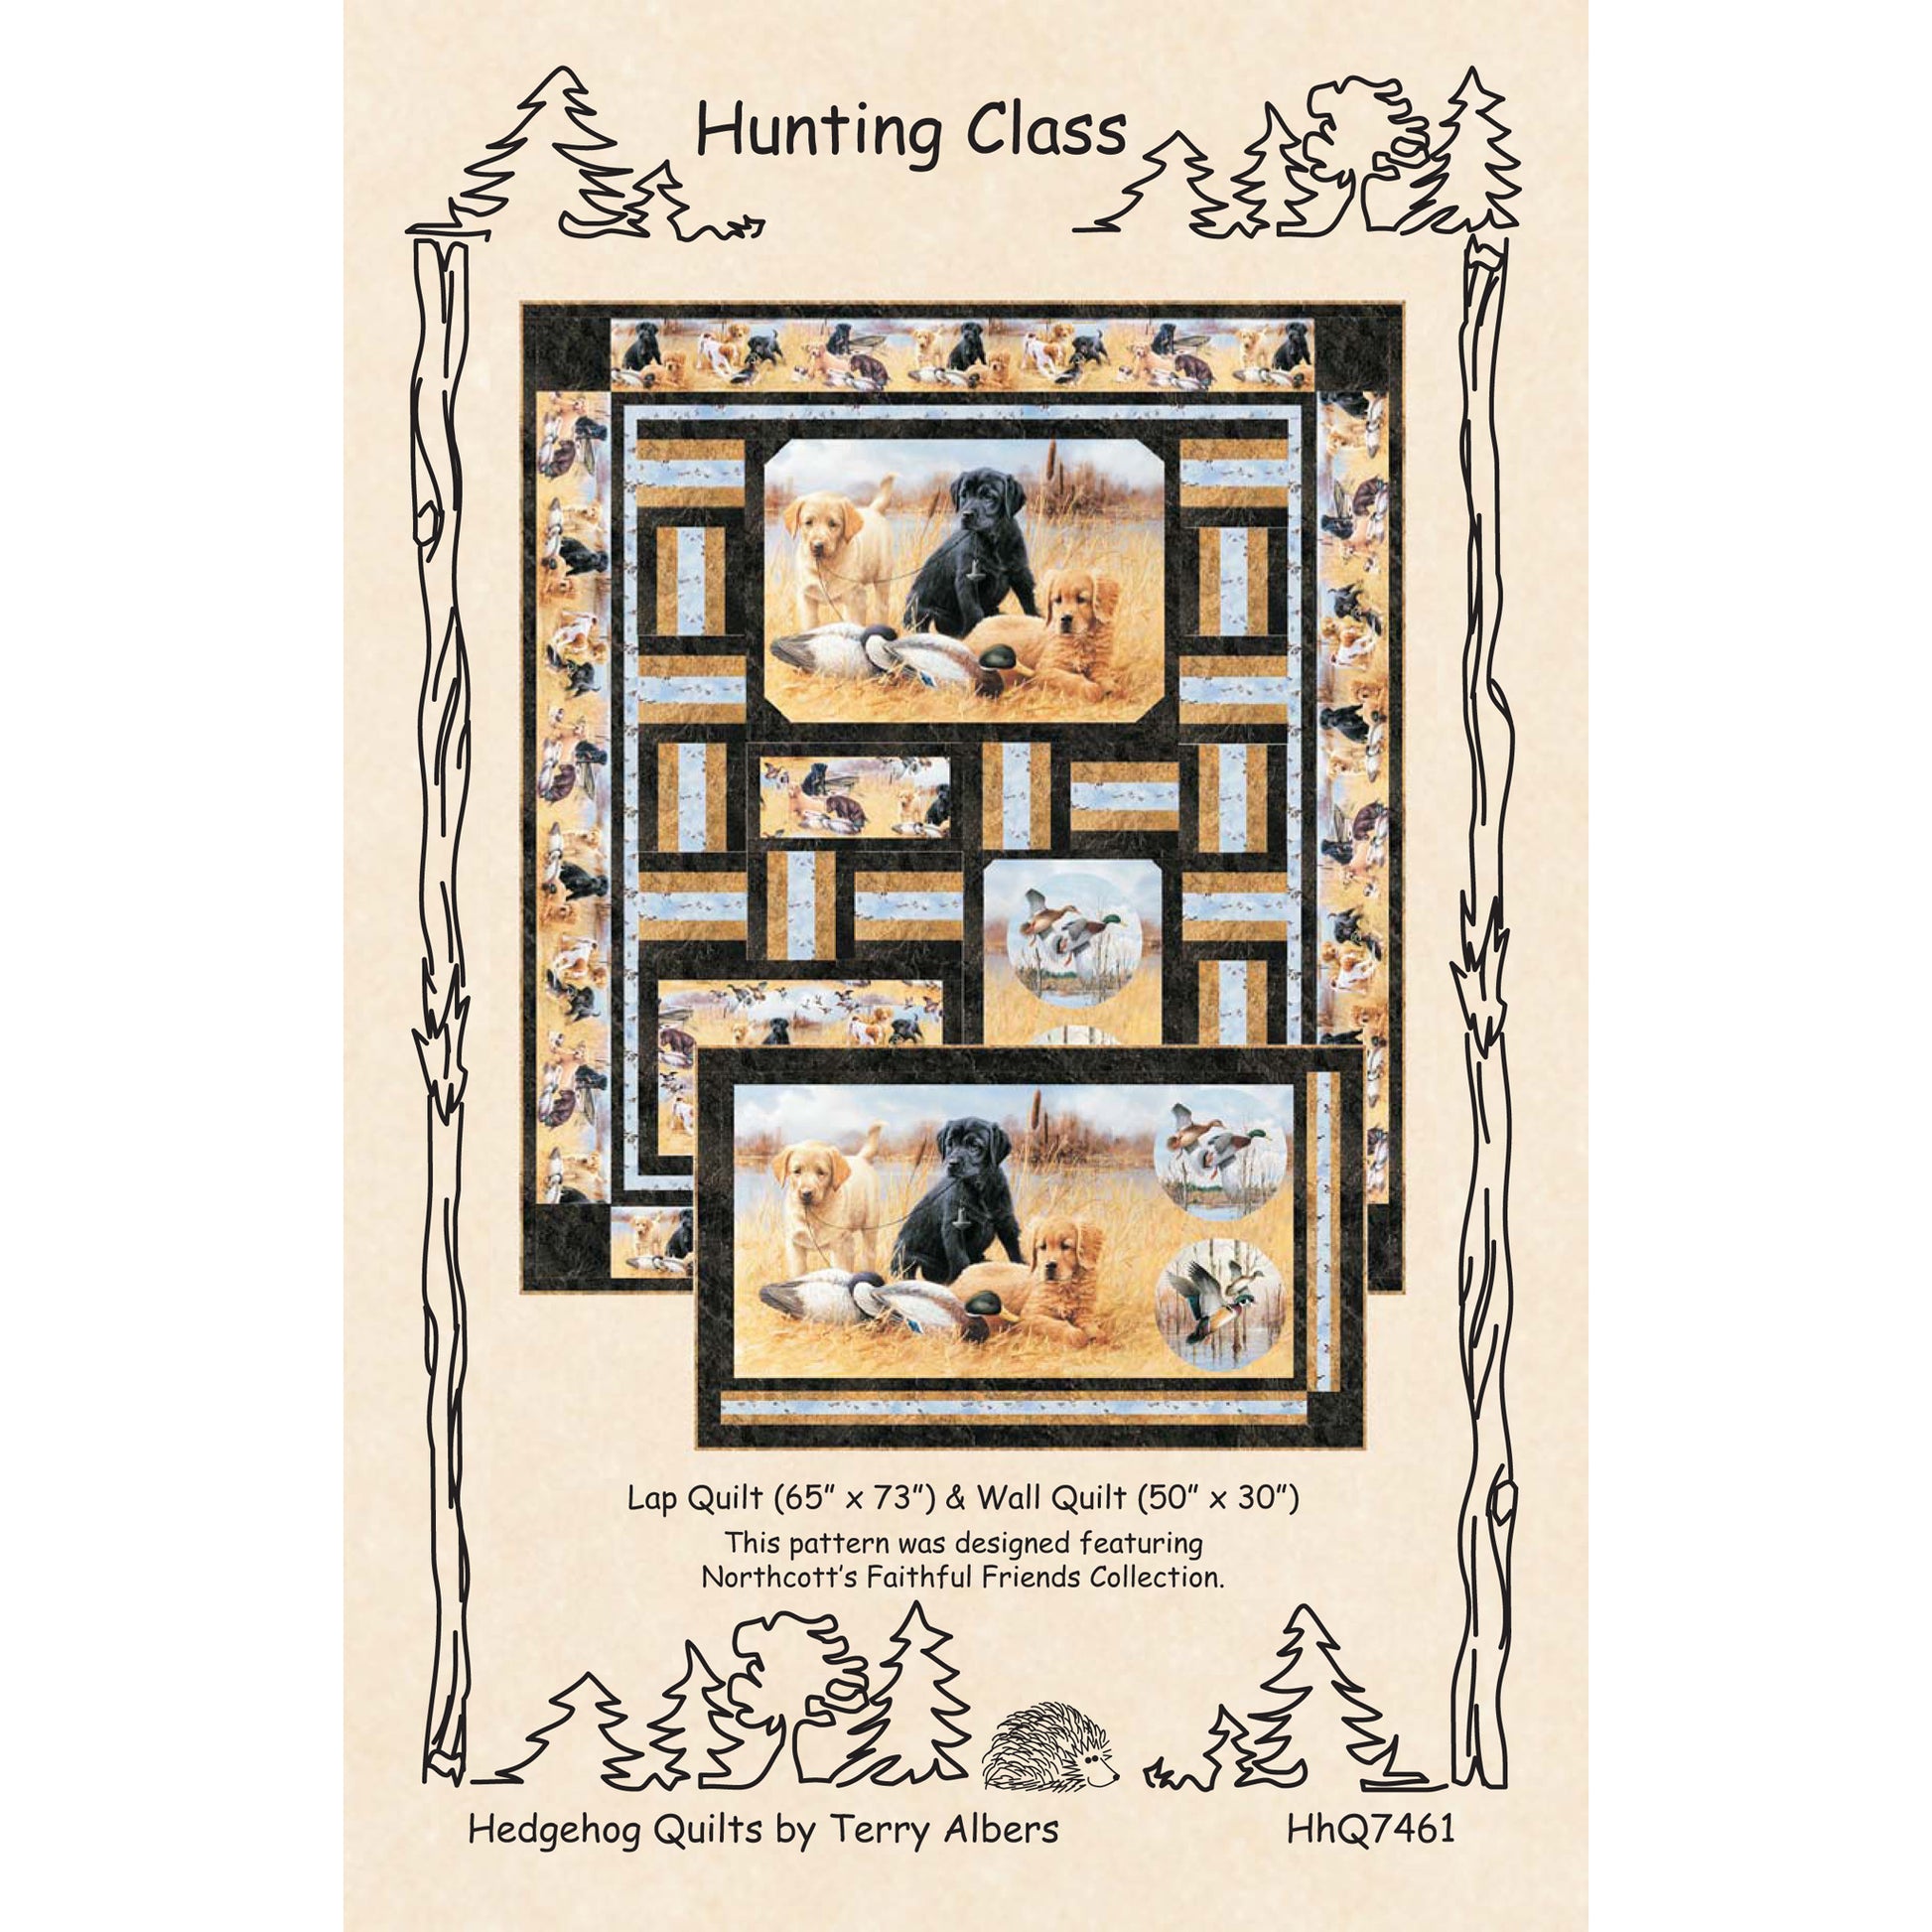 Cover image of pattern for Hunting Class Quilt.